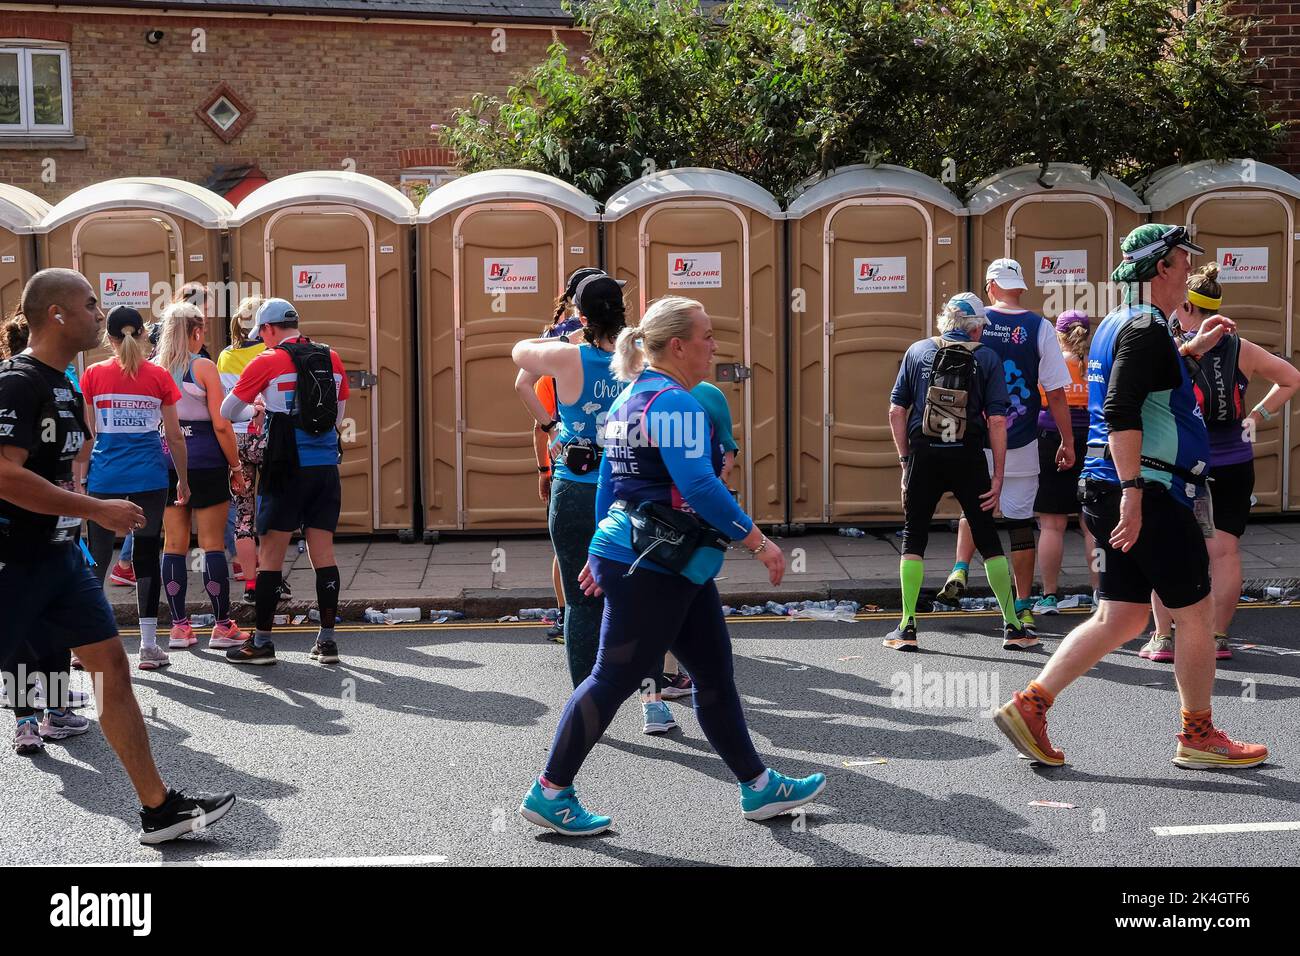 London UK, 2nd October 2022.  Participants queue to use portable toilets during the London Marathon. More than 40,000 participants take to the streets of the capital for the 42nd London Marathon. The event which attracts elite runners and wheelchair athletes also raises millions of pounds for charity through the participation of club and fitness runners along with those just wanting to take on the 26 mile challenge. Stock Photo